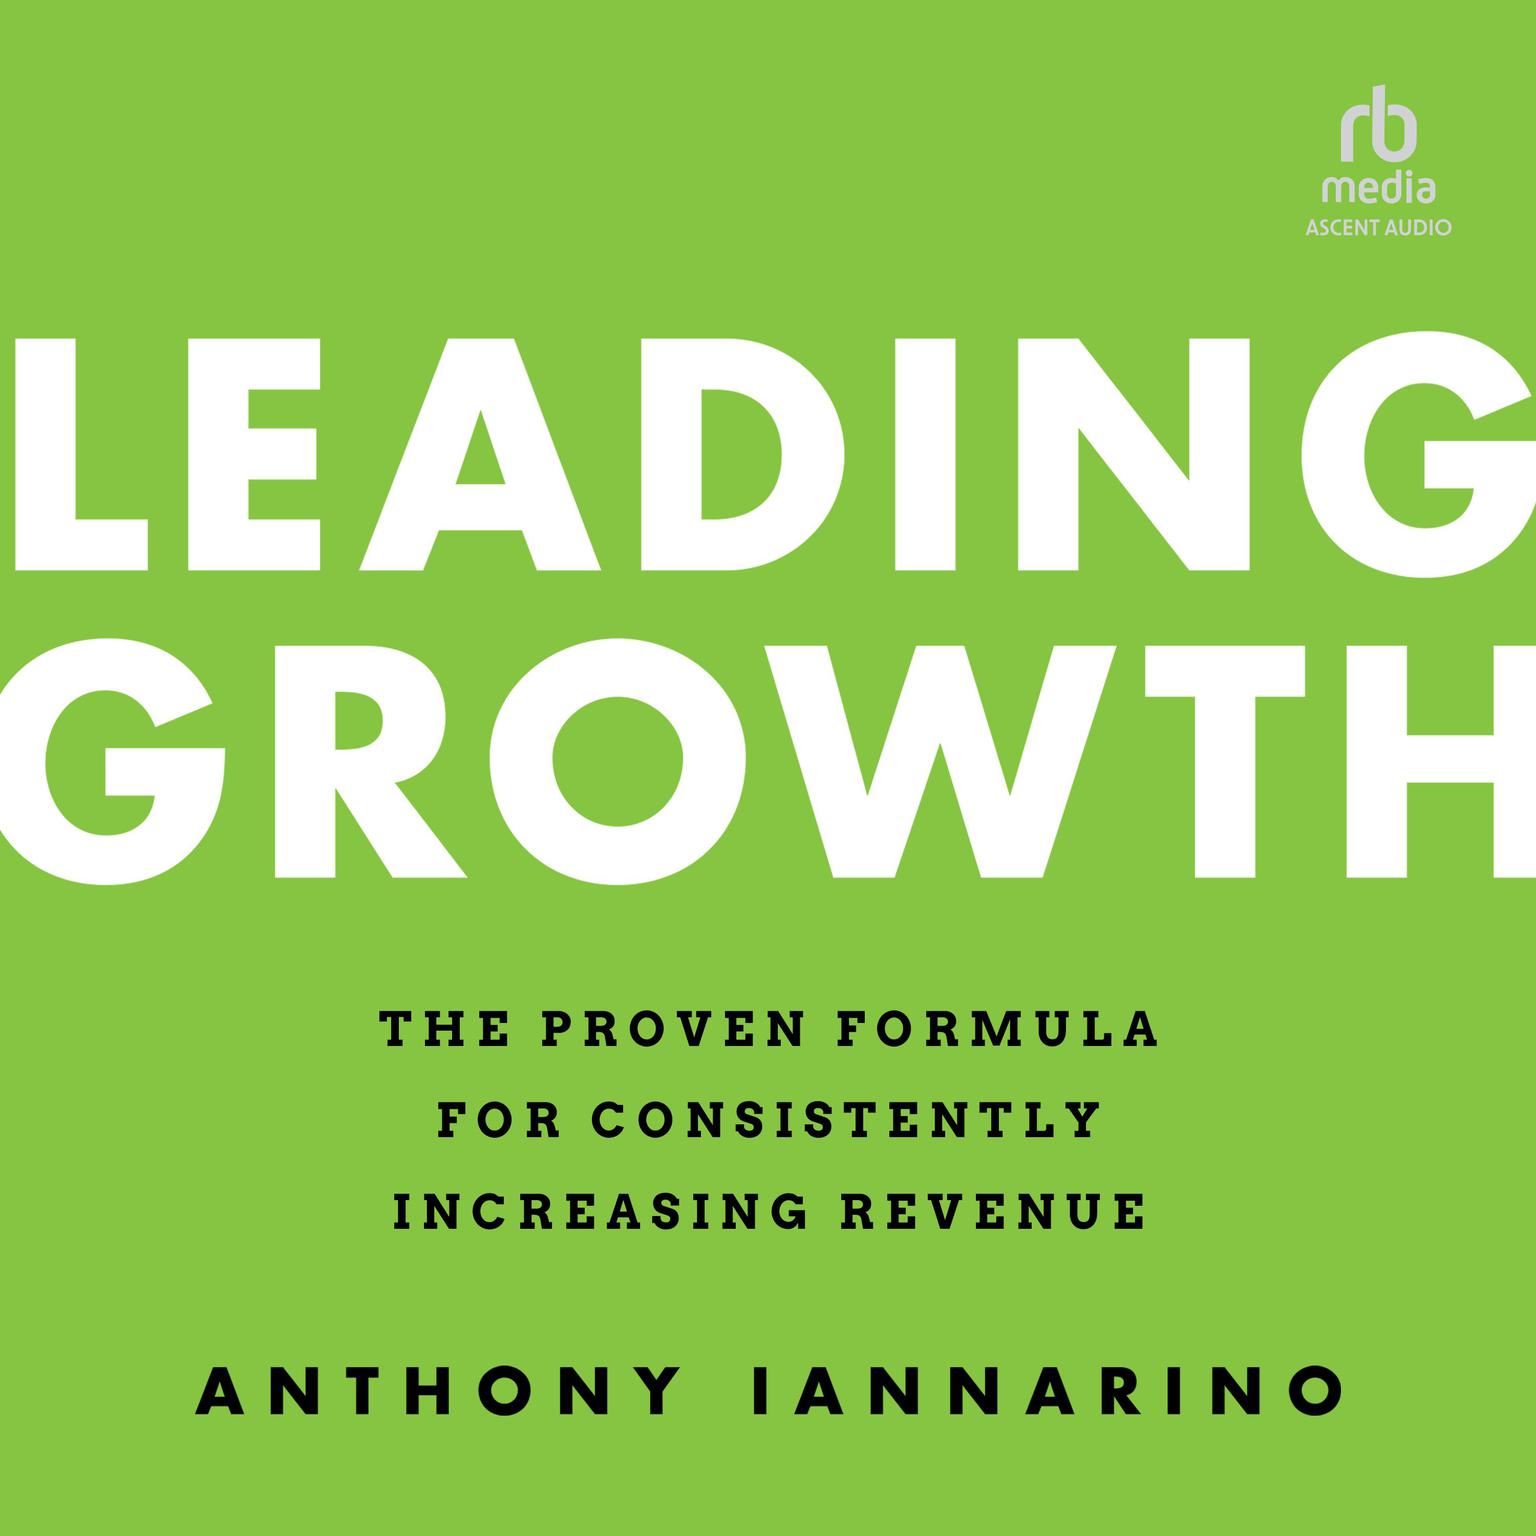 Leading Growth: The Proven Formula for Consistently Increasing Revenue, 1st Edition Audiobook, by Anthony Iannarino